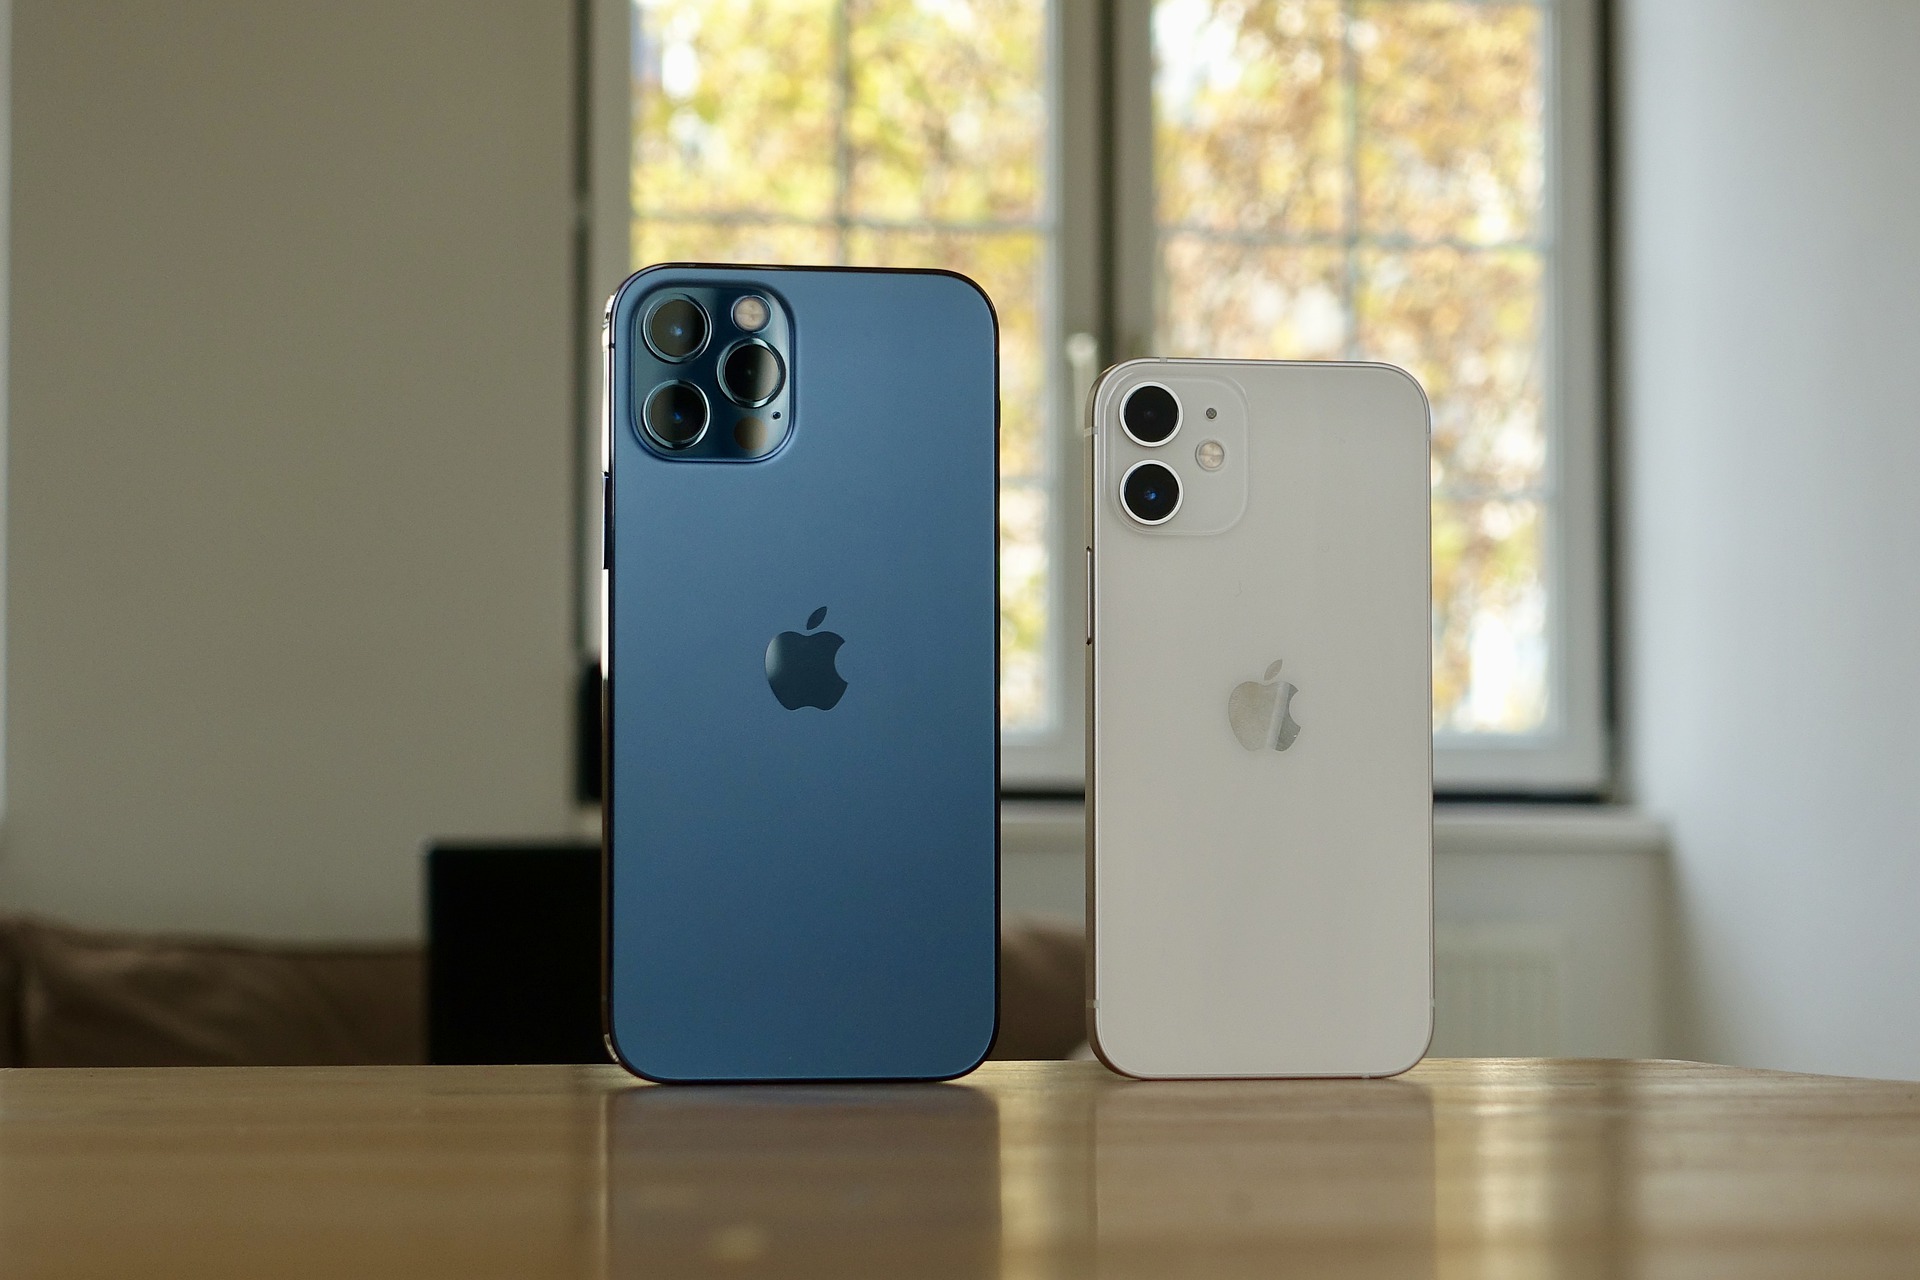 Apple Shipped Record iPhones in Q4 2020, Global Smartphone Market Continues to Recover